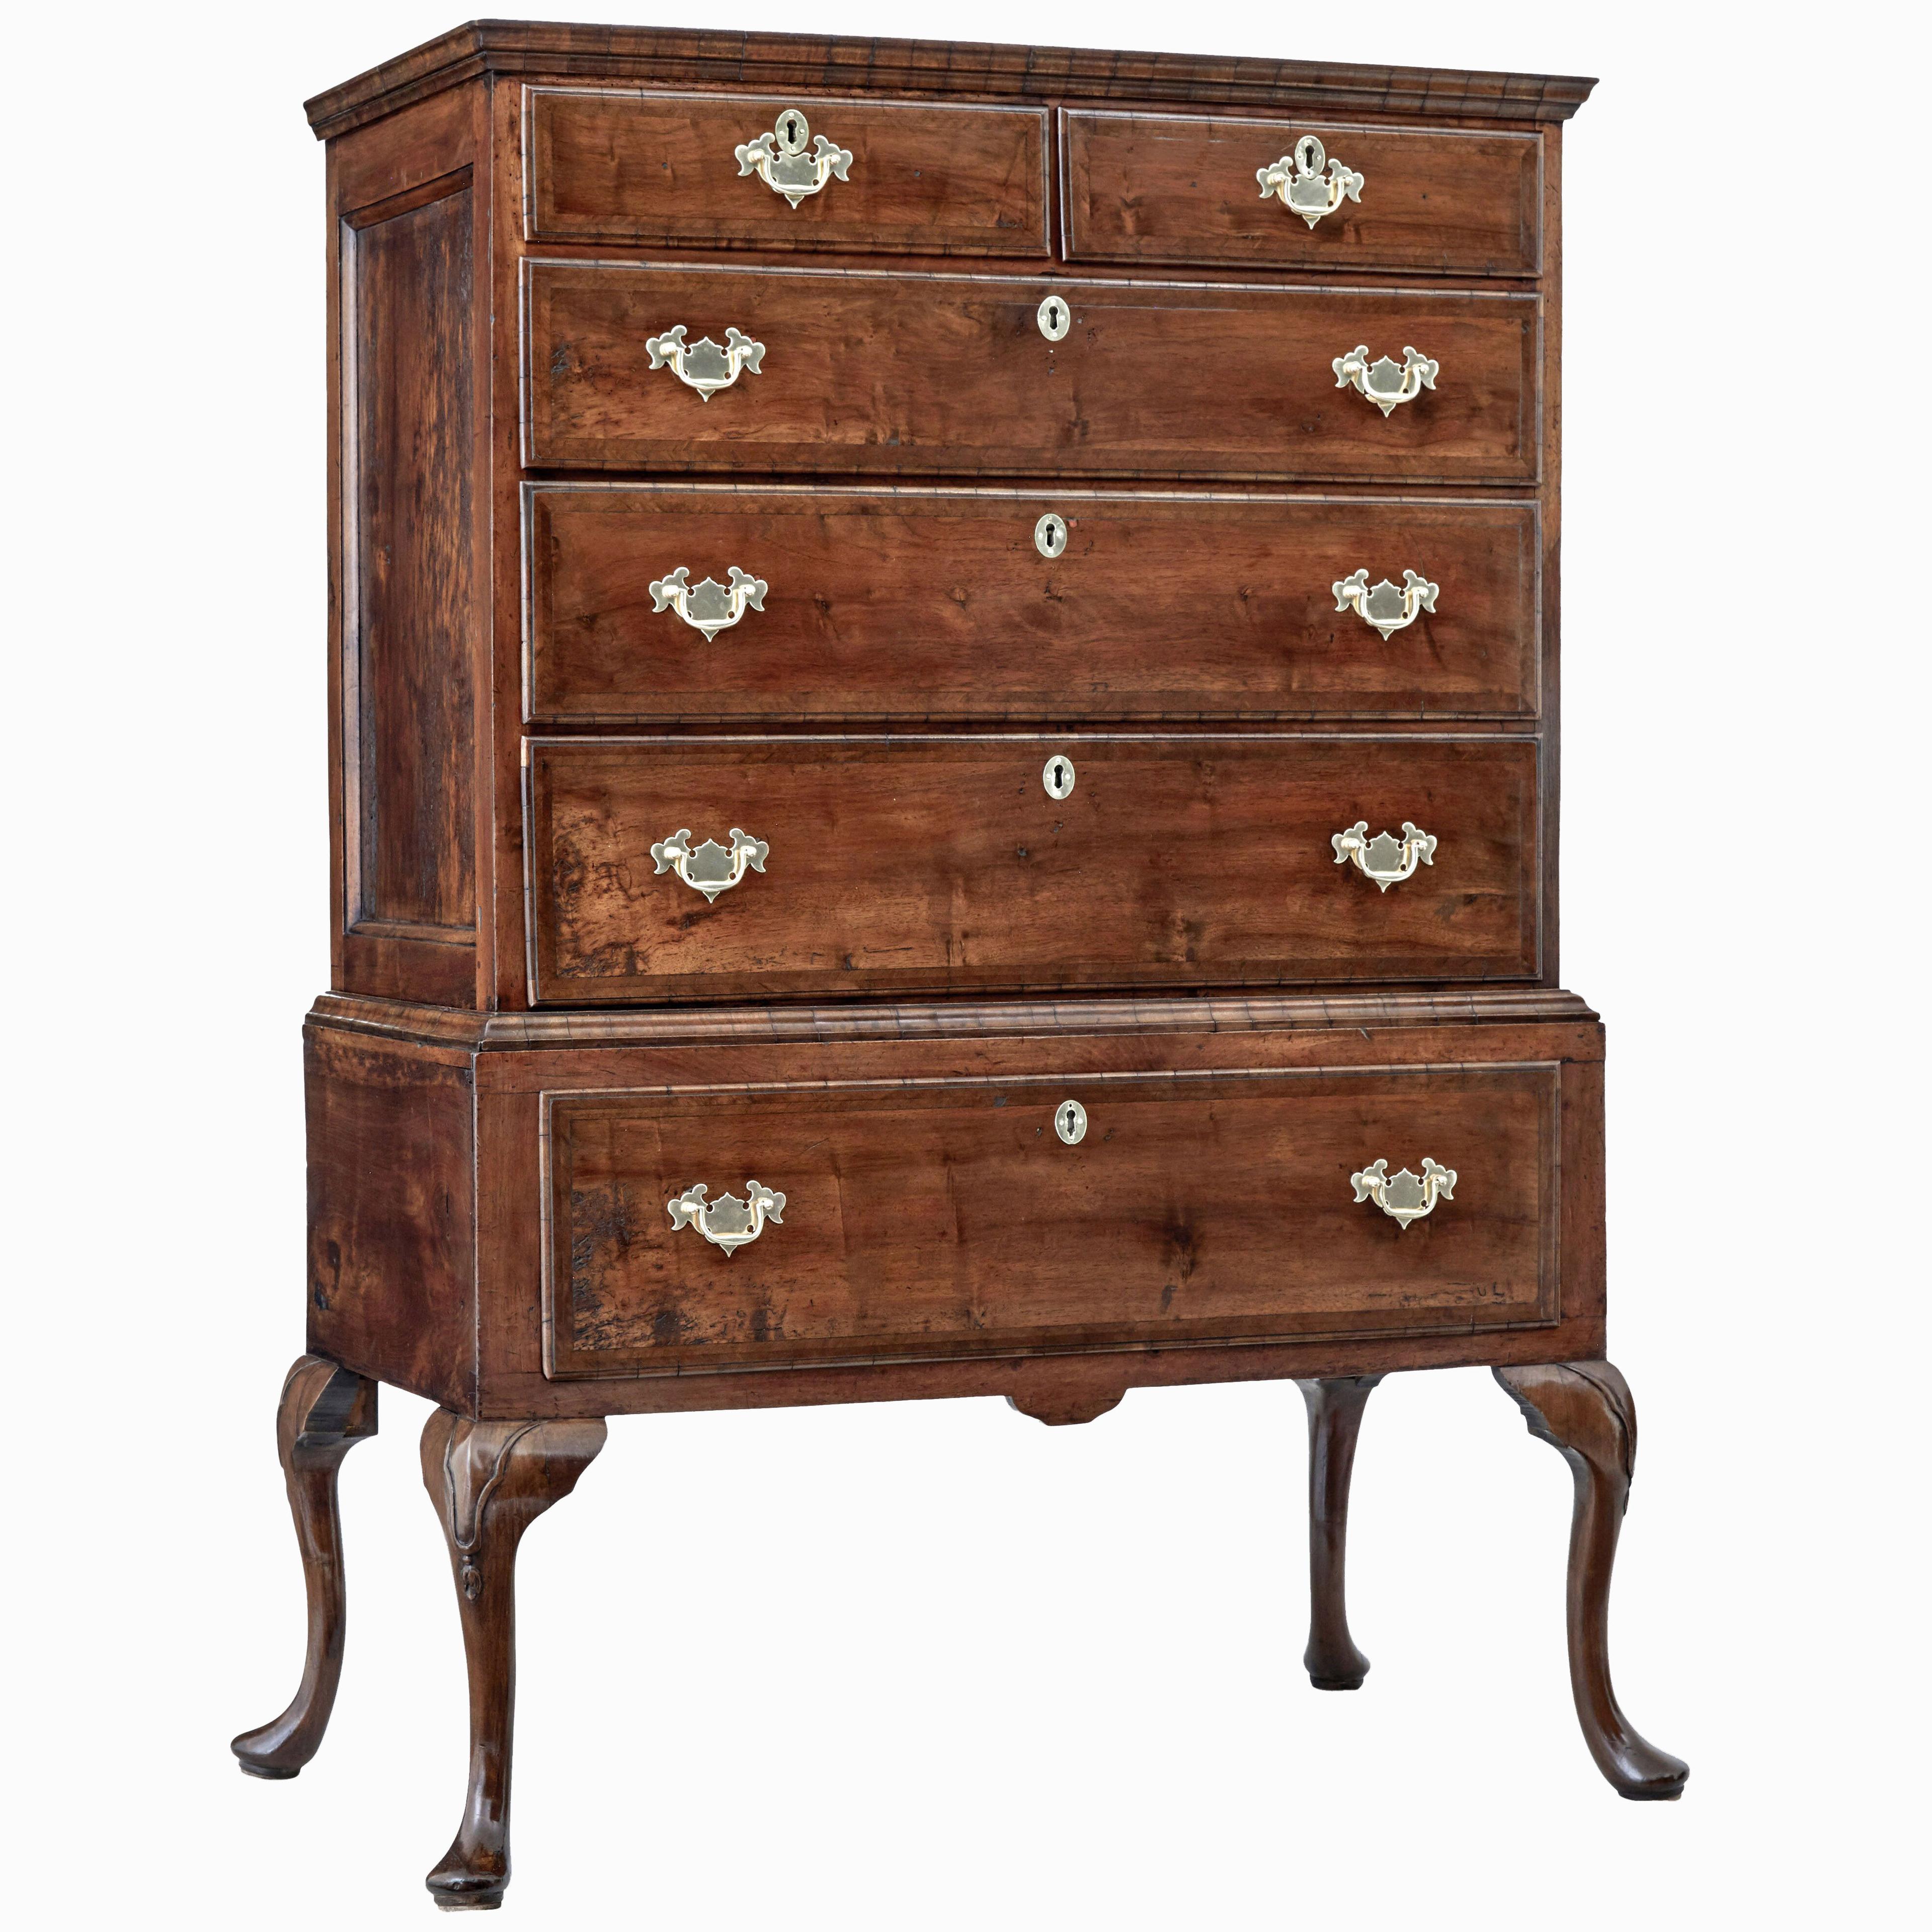 LATE 17TH CENTURY WILLIAM AND MARY WALNUT CHEST ON STAND